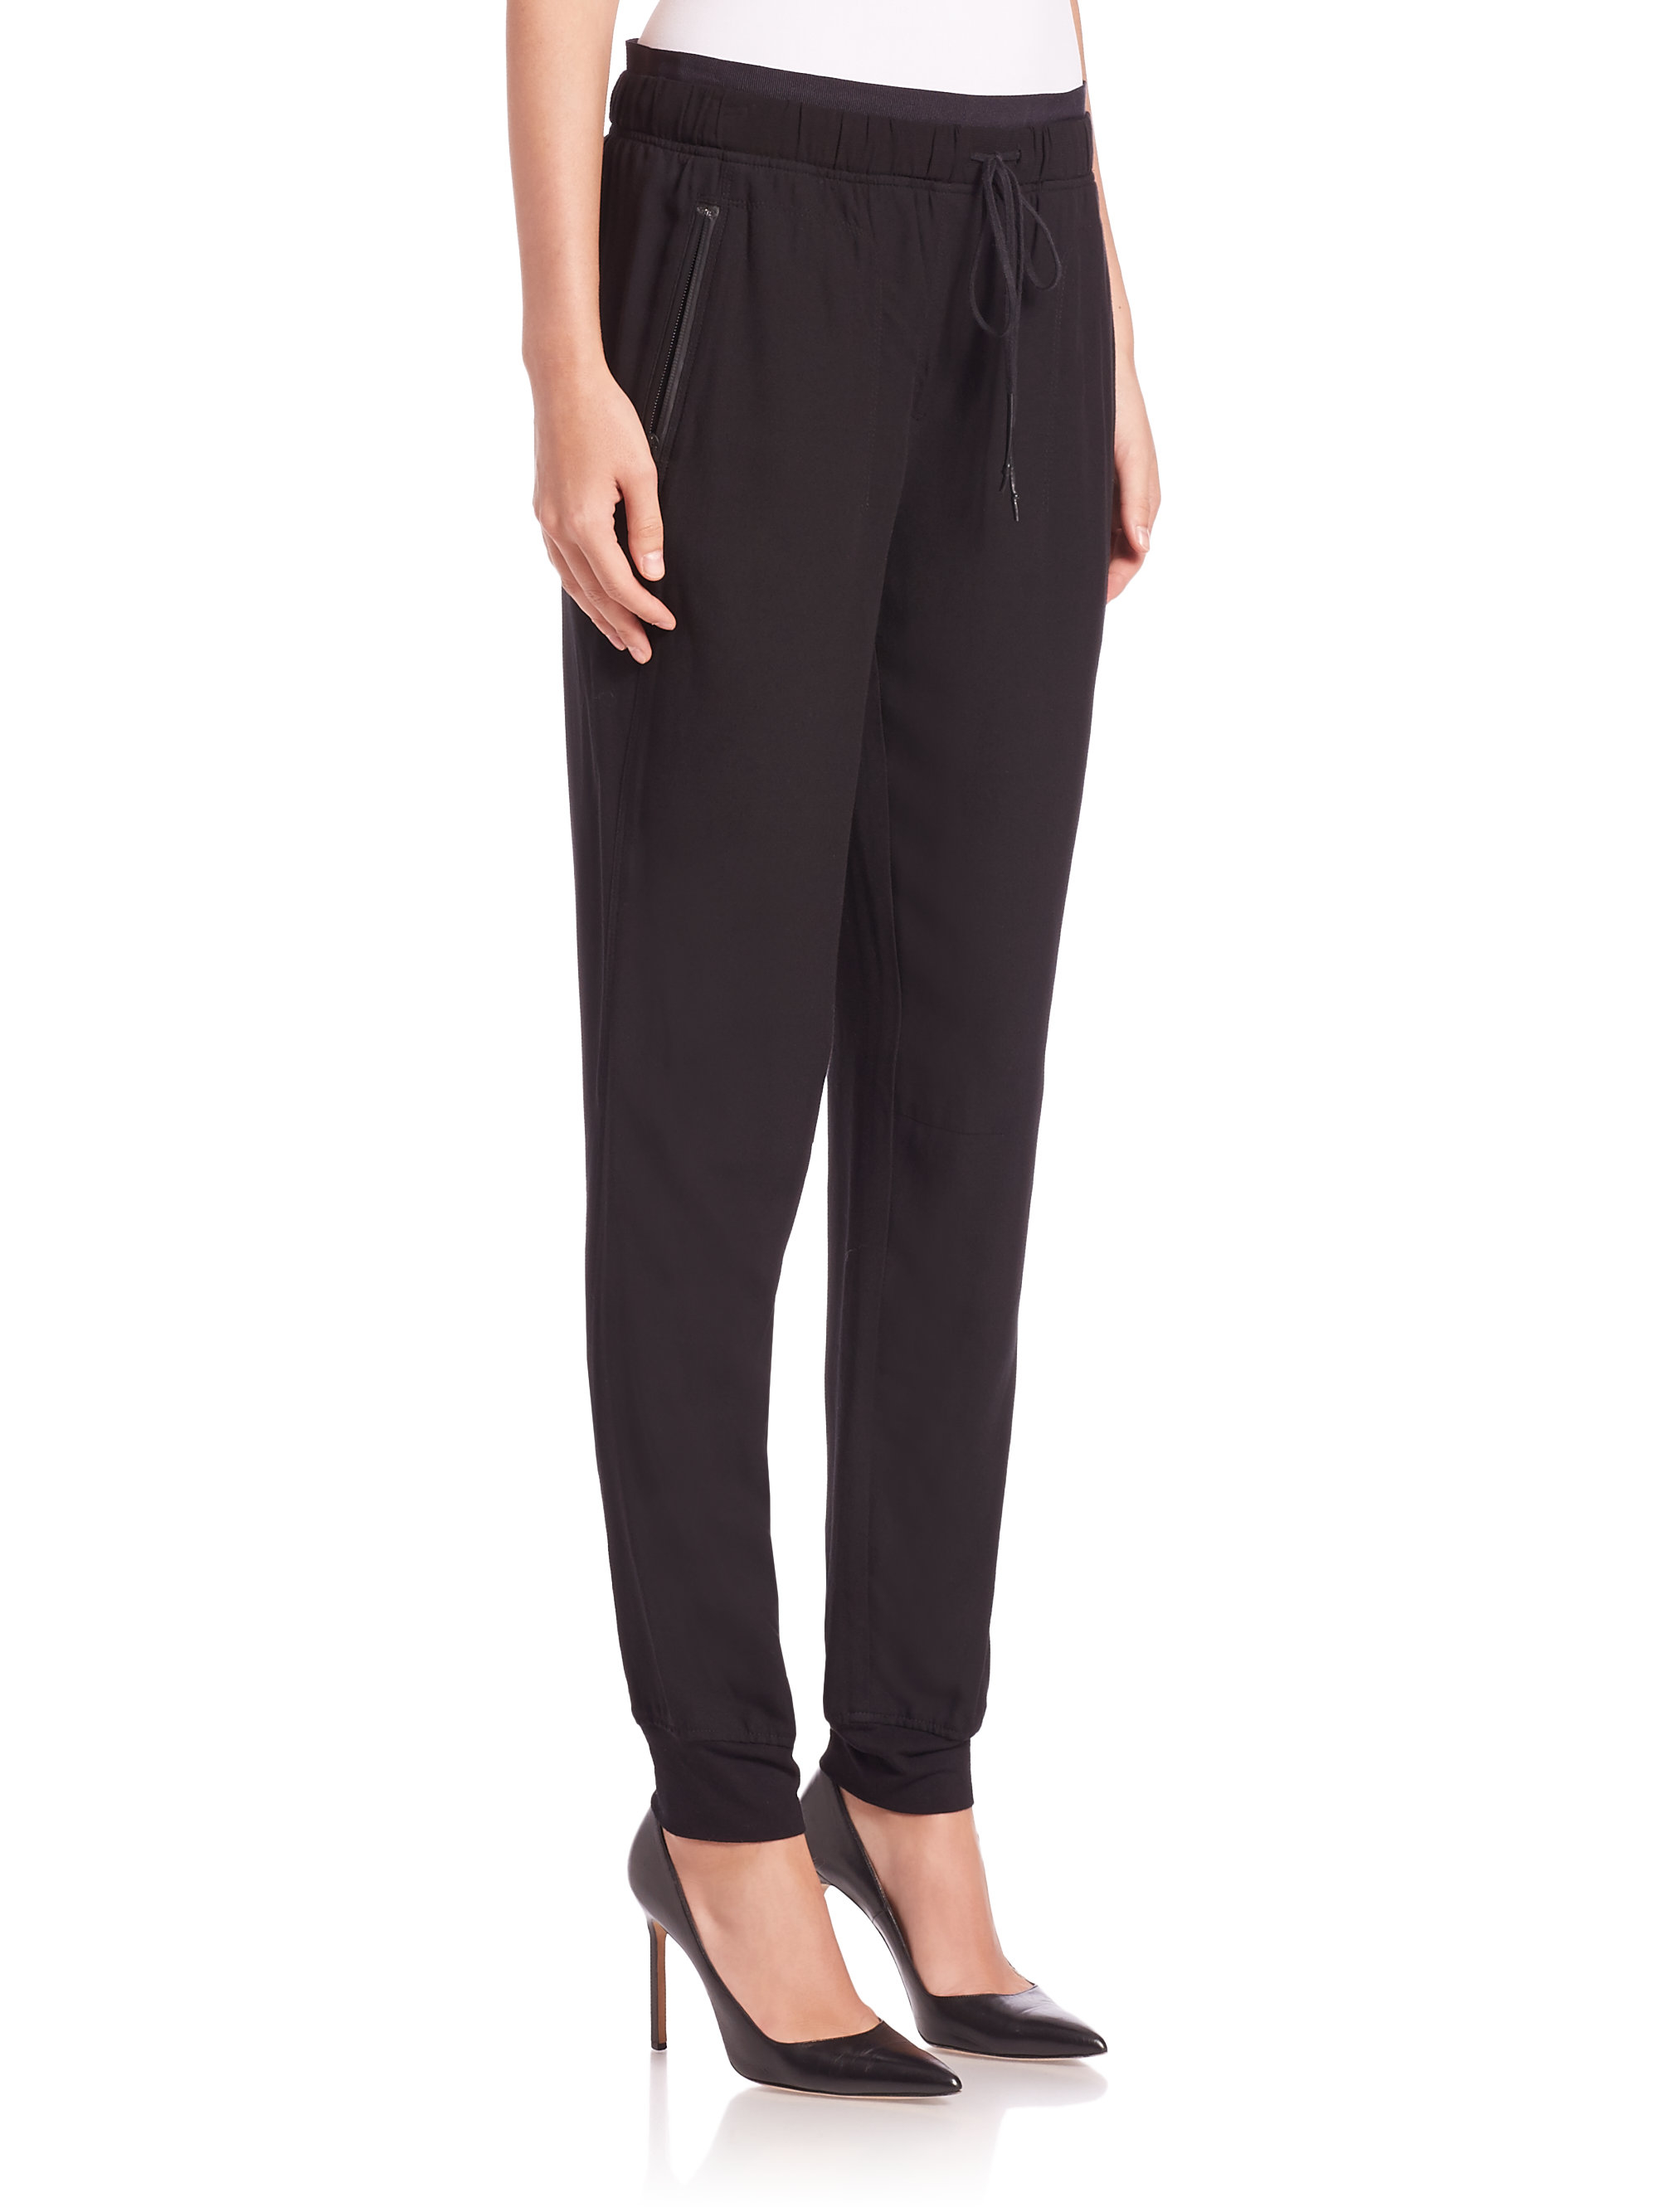 Lyst - Dkny Ribbed Pull-on Pants in Black